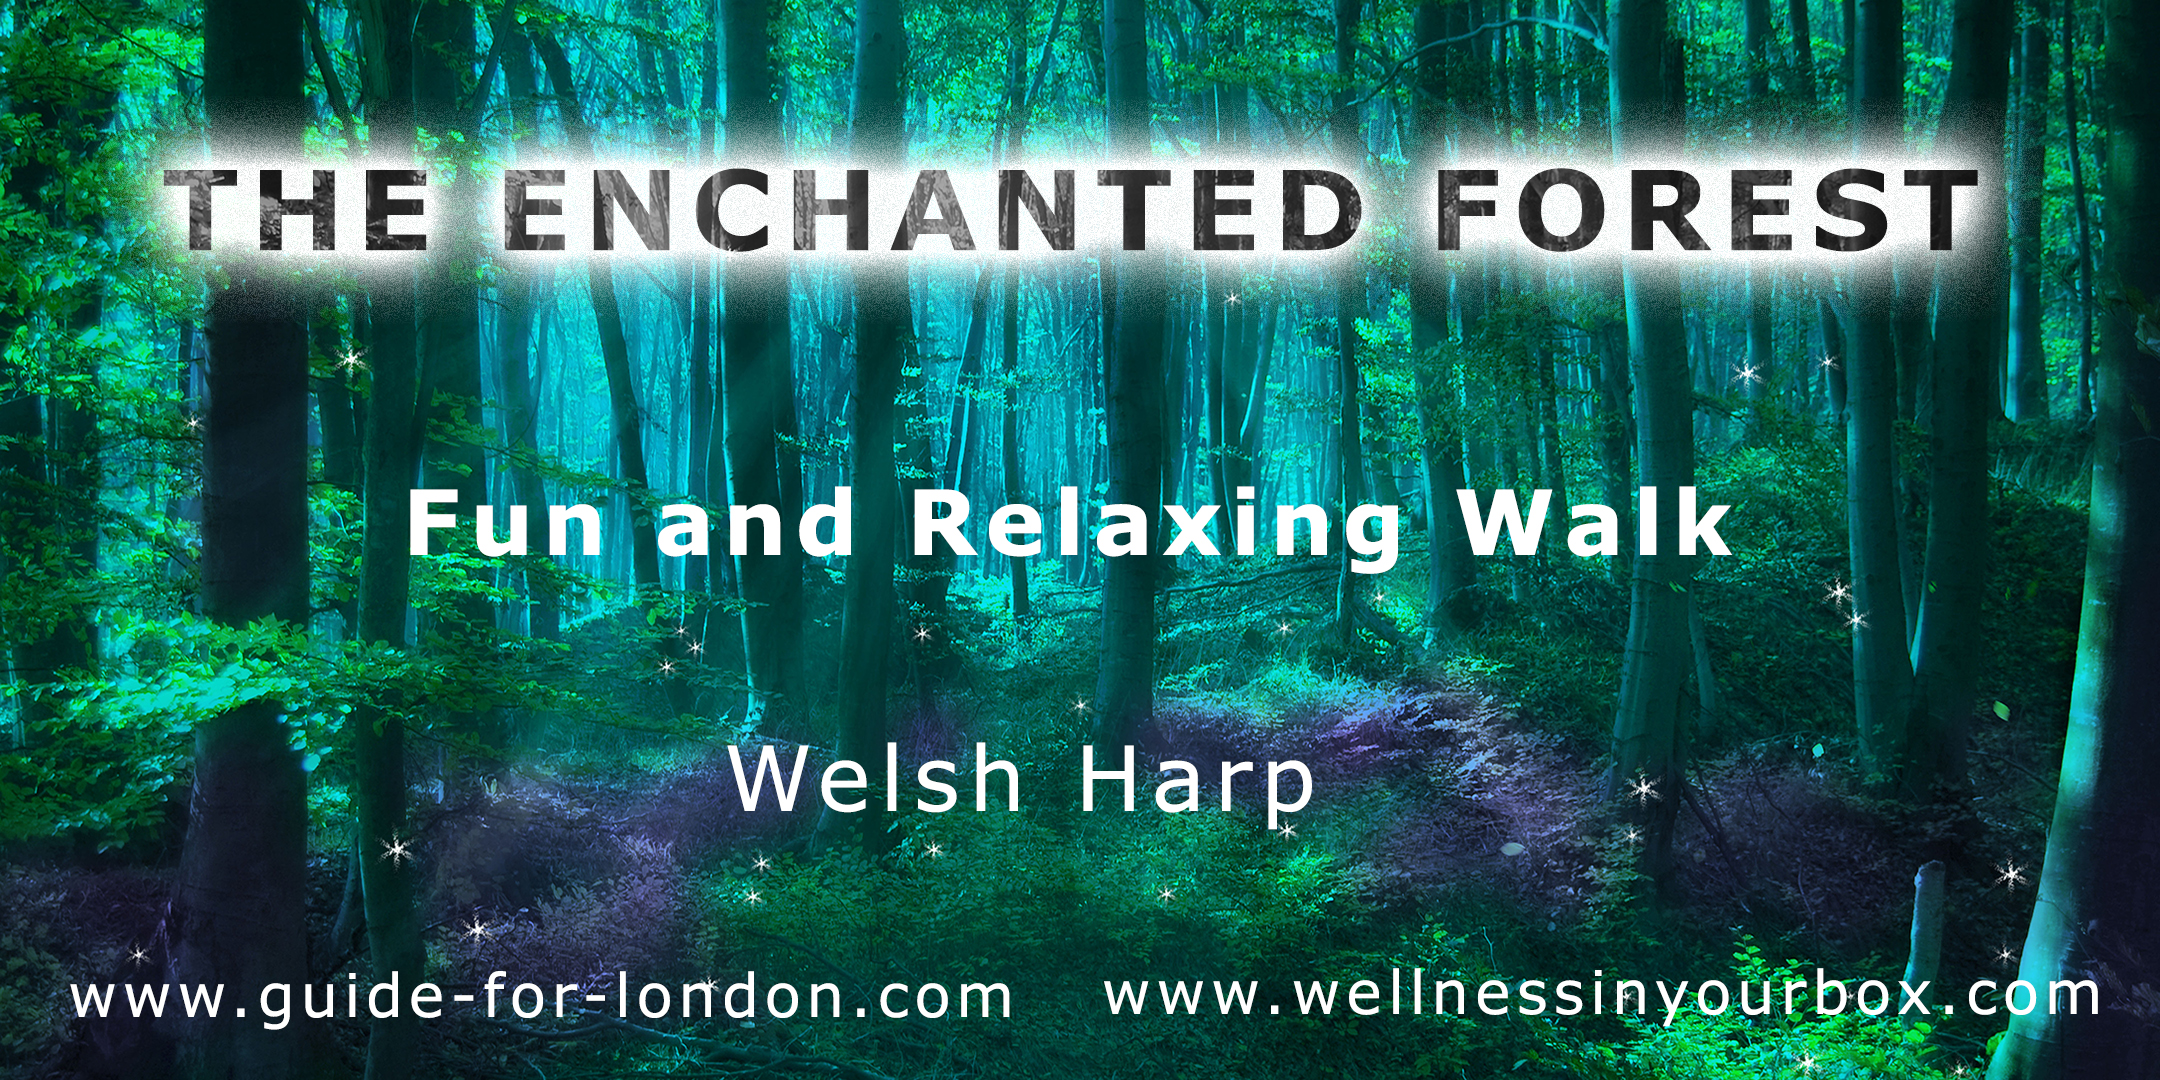 Enchanted Forest of Welsh Harp: fun and relaxing walk combining stories, arts, meditation and mindful movement.